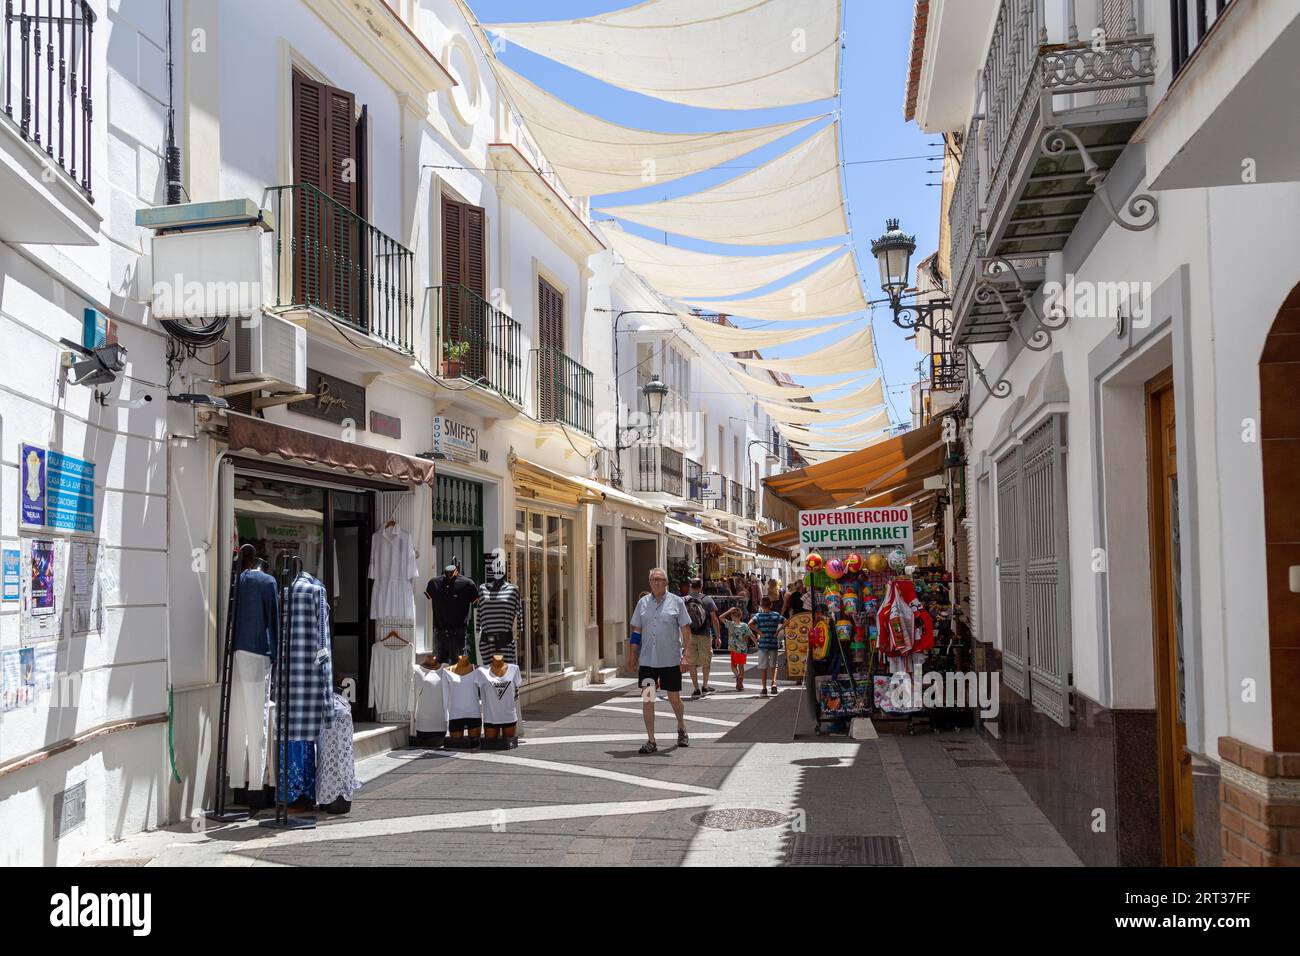 Nerja, Spain, May 28, 2019: People walking in a charming narrow shopping street in the city centre Stock Photo